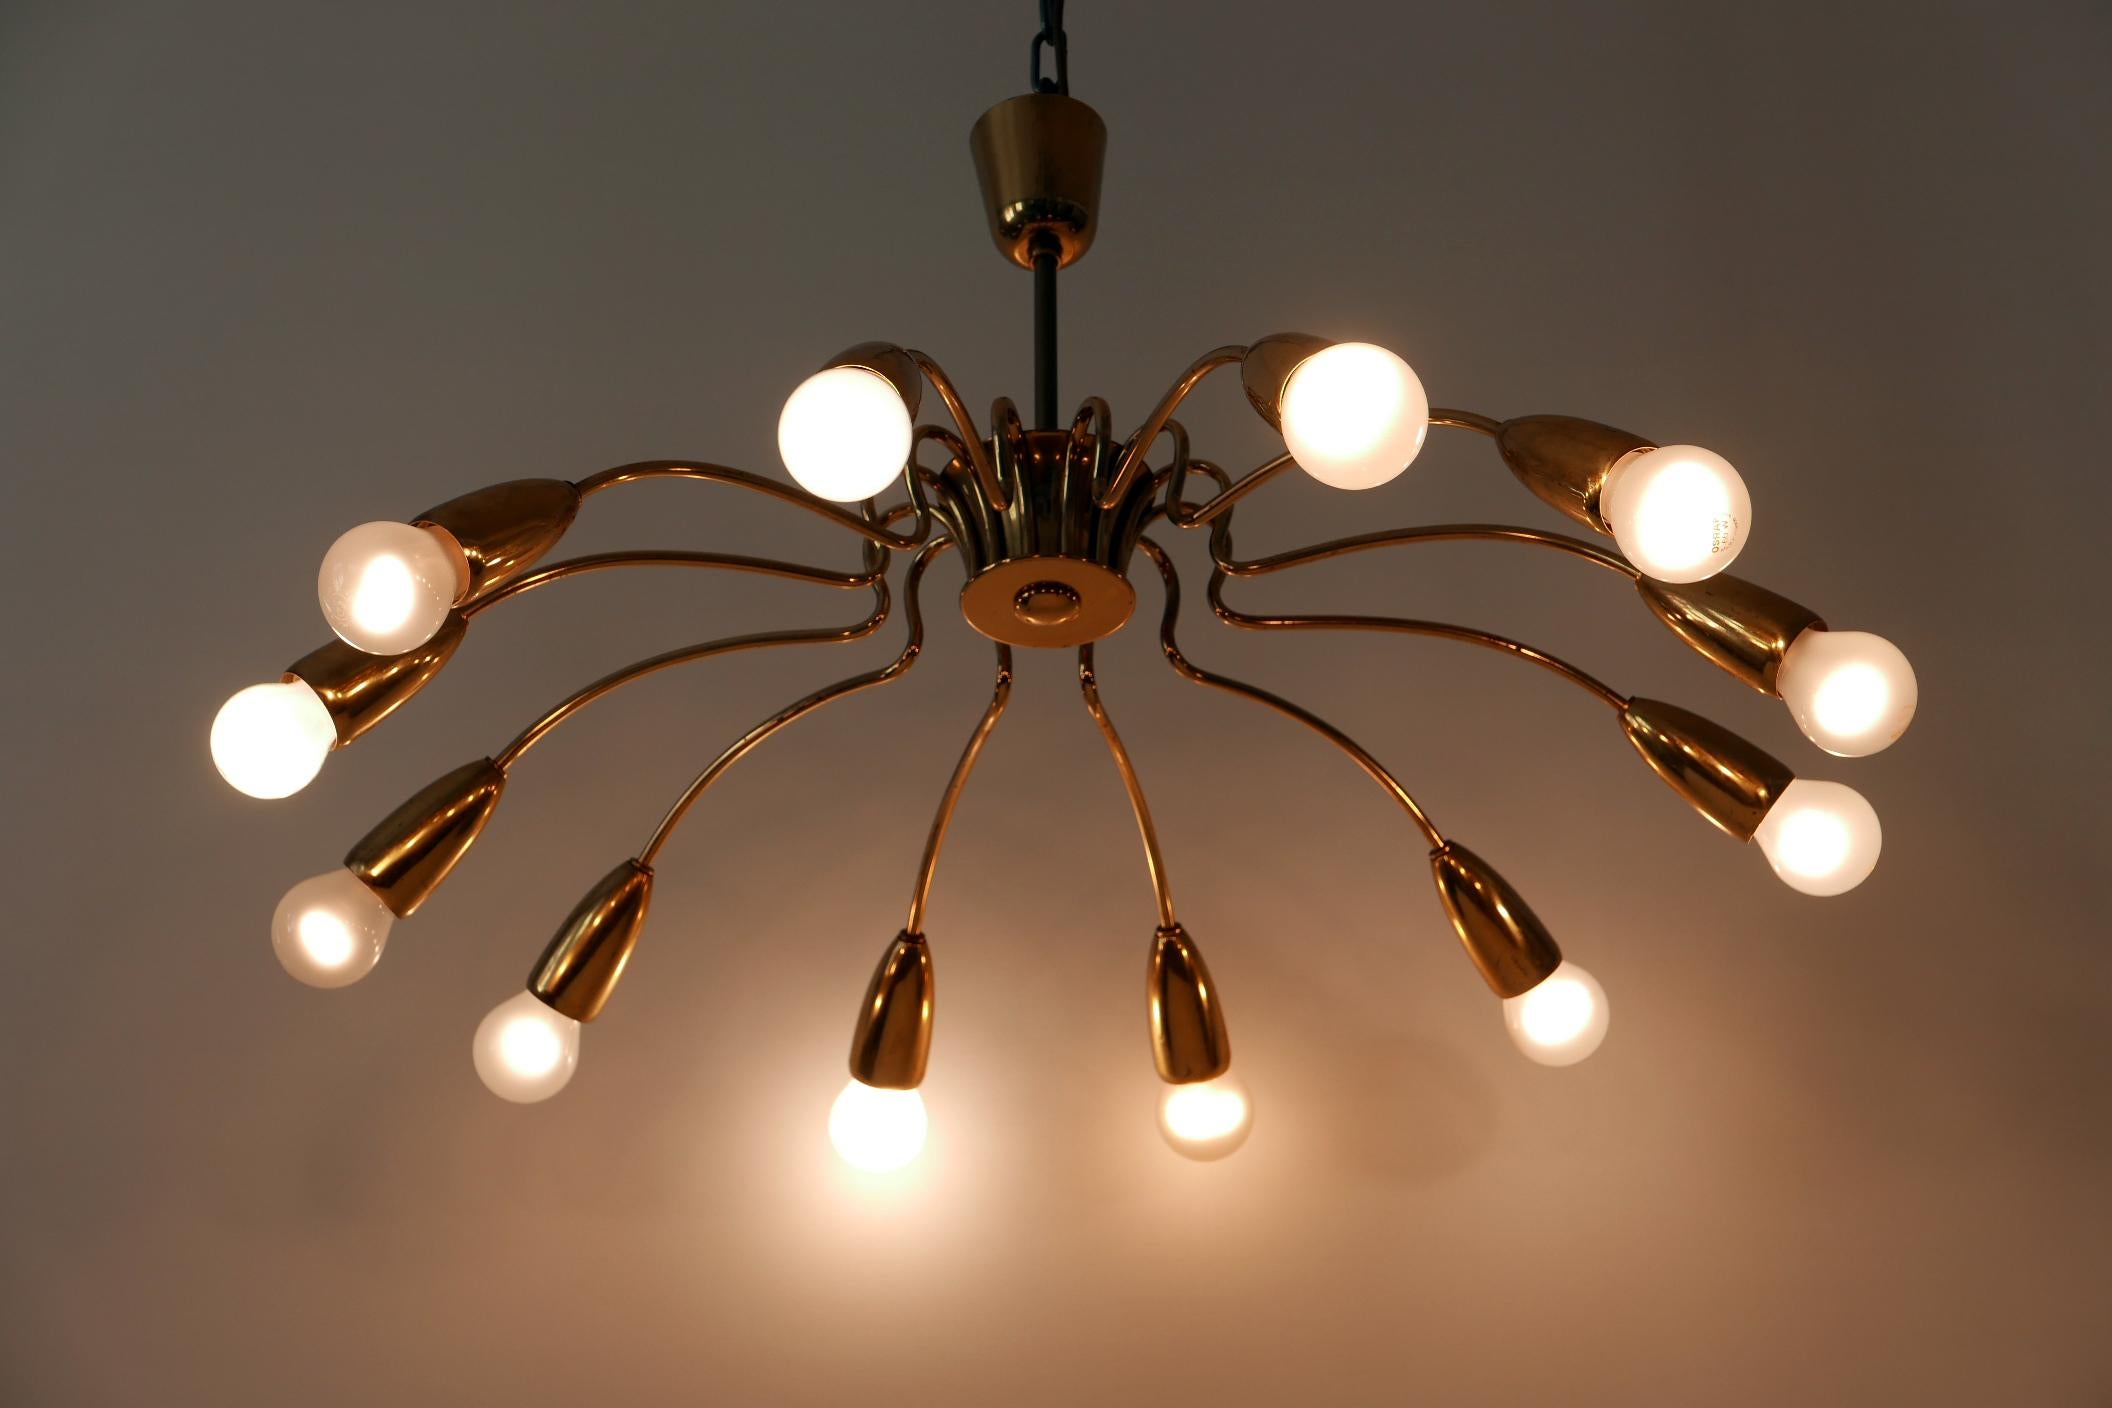 Gorgeous twelve-armed Mid-Century Modern sputnik chandelier or pendant light. Designed and manufactured in Germany, 1950s.

Executed in brass, the chandelier needs 12 x E27 screw fit bulbs. It works both with 110 / 230 volt.

Good original